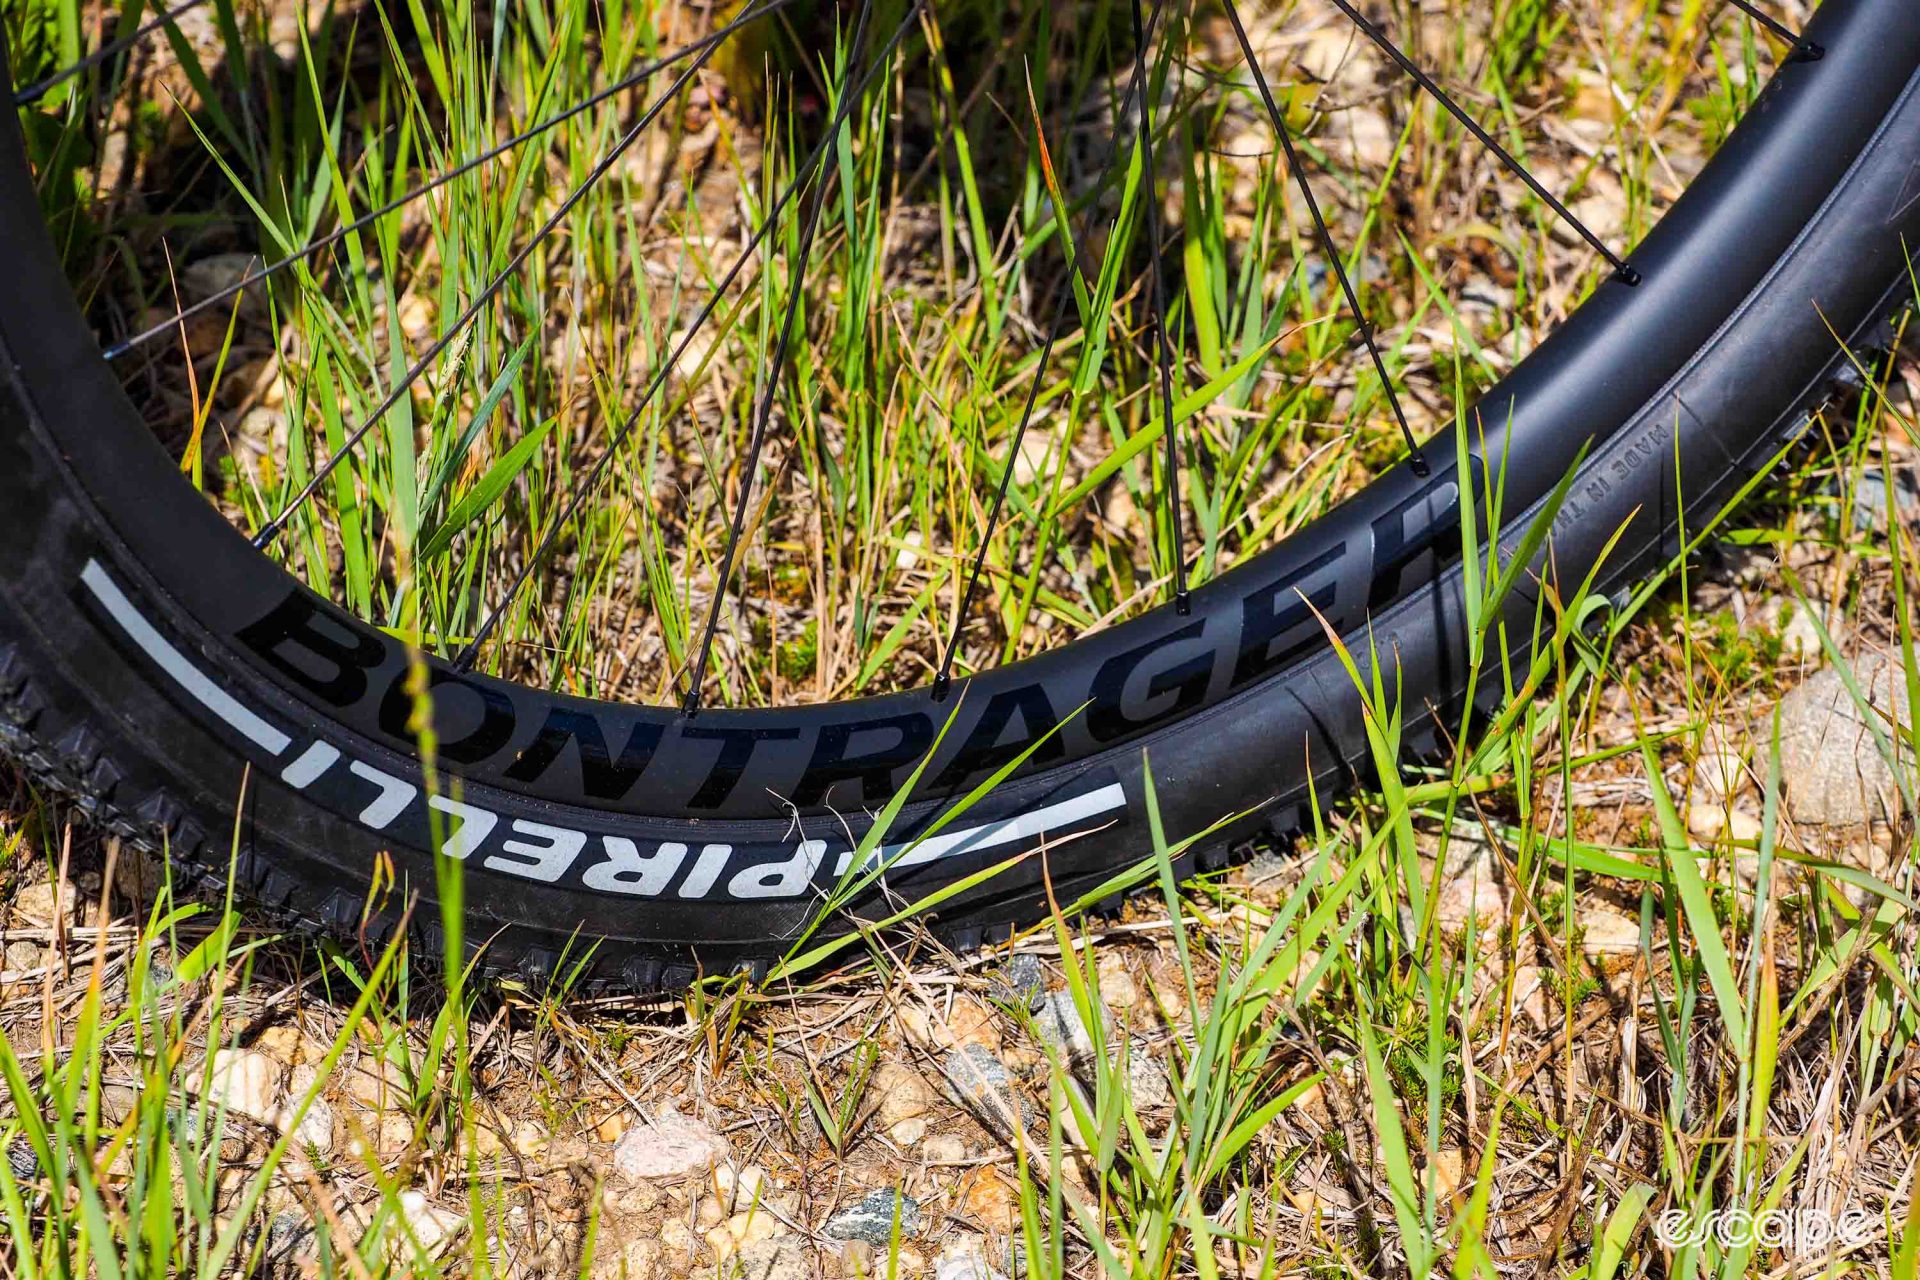 Bontrager's Kovee RSL carbon fiber wheels are shown with black logos and spokes, shod with Pirelli - not Bontrager - race tires.